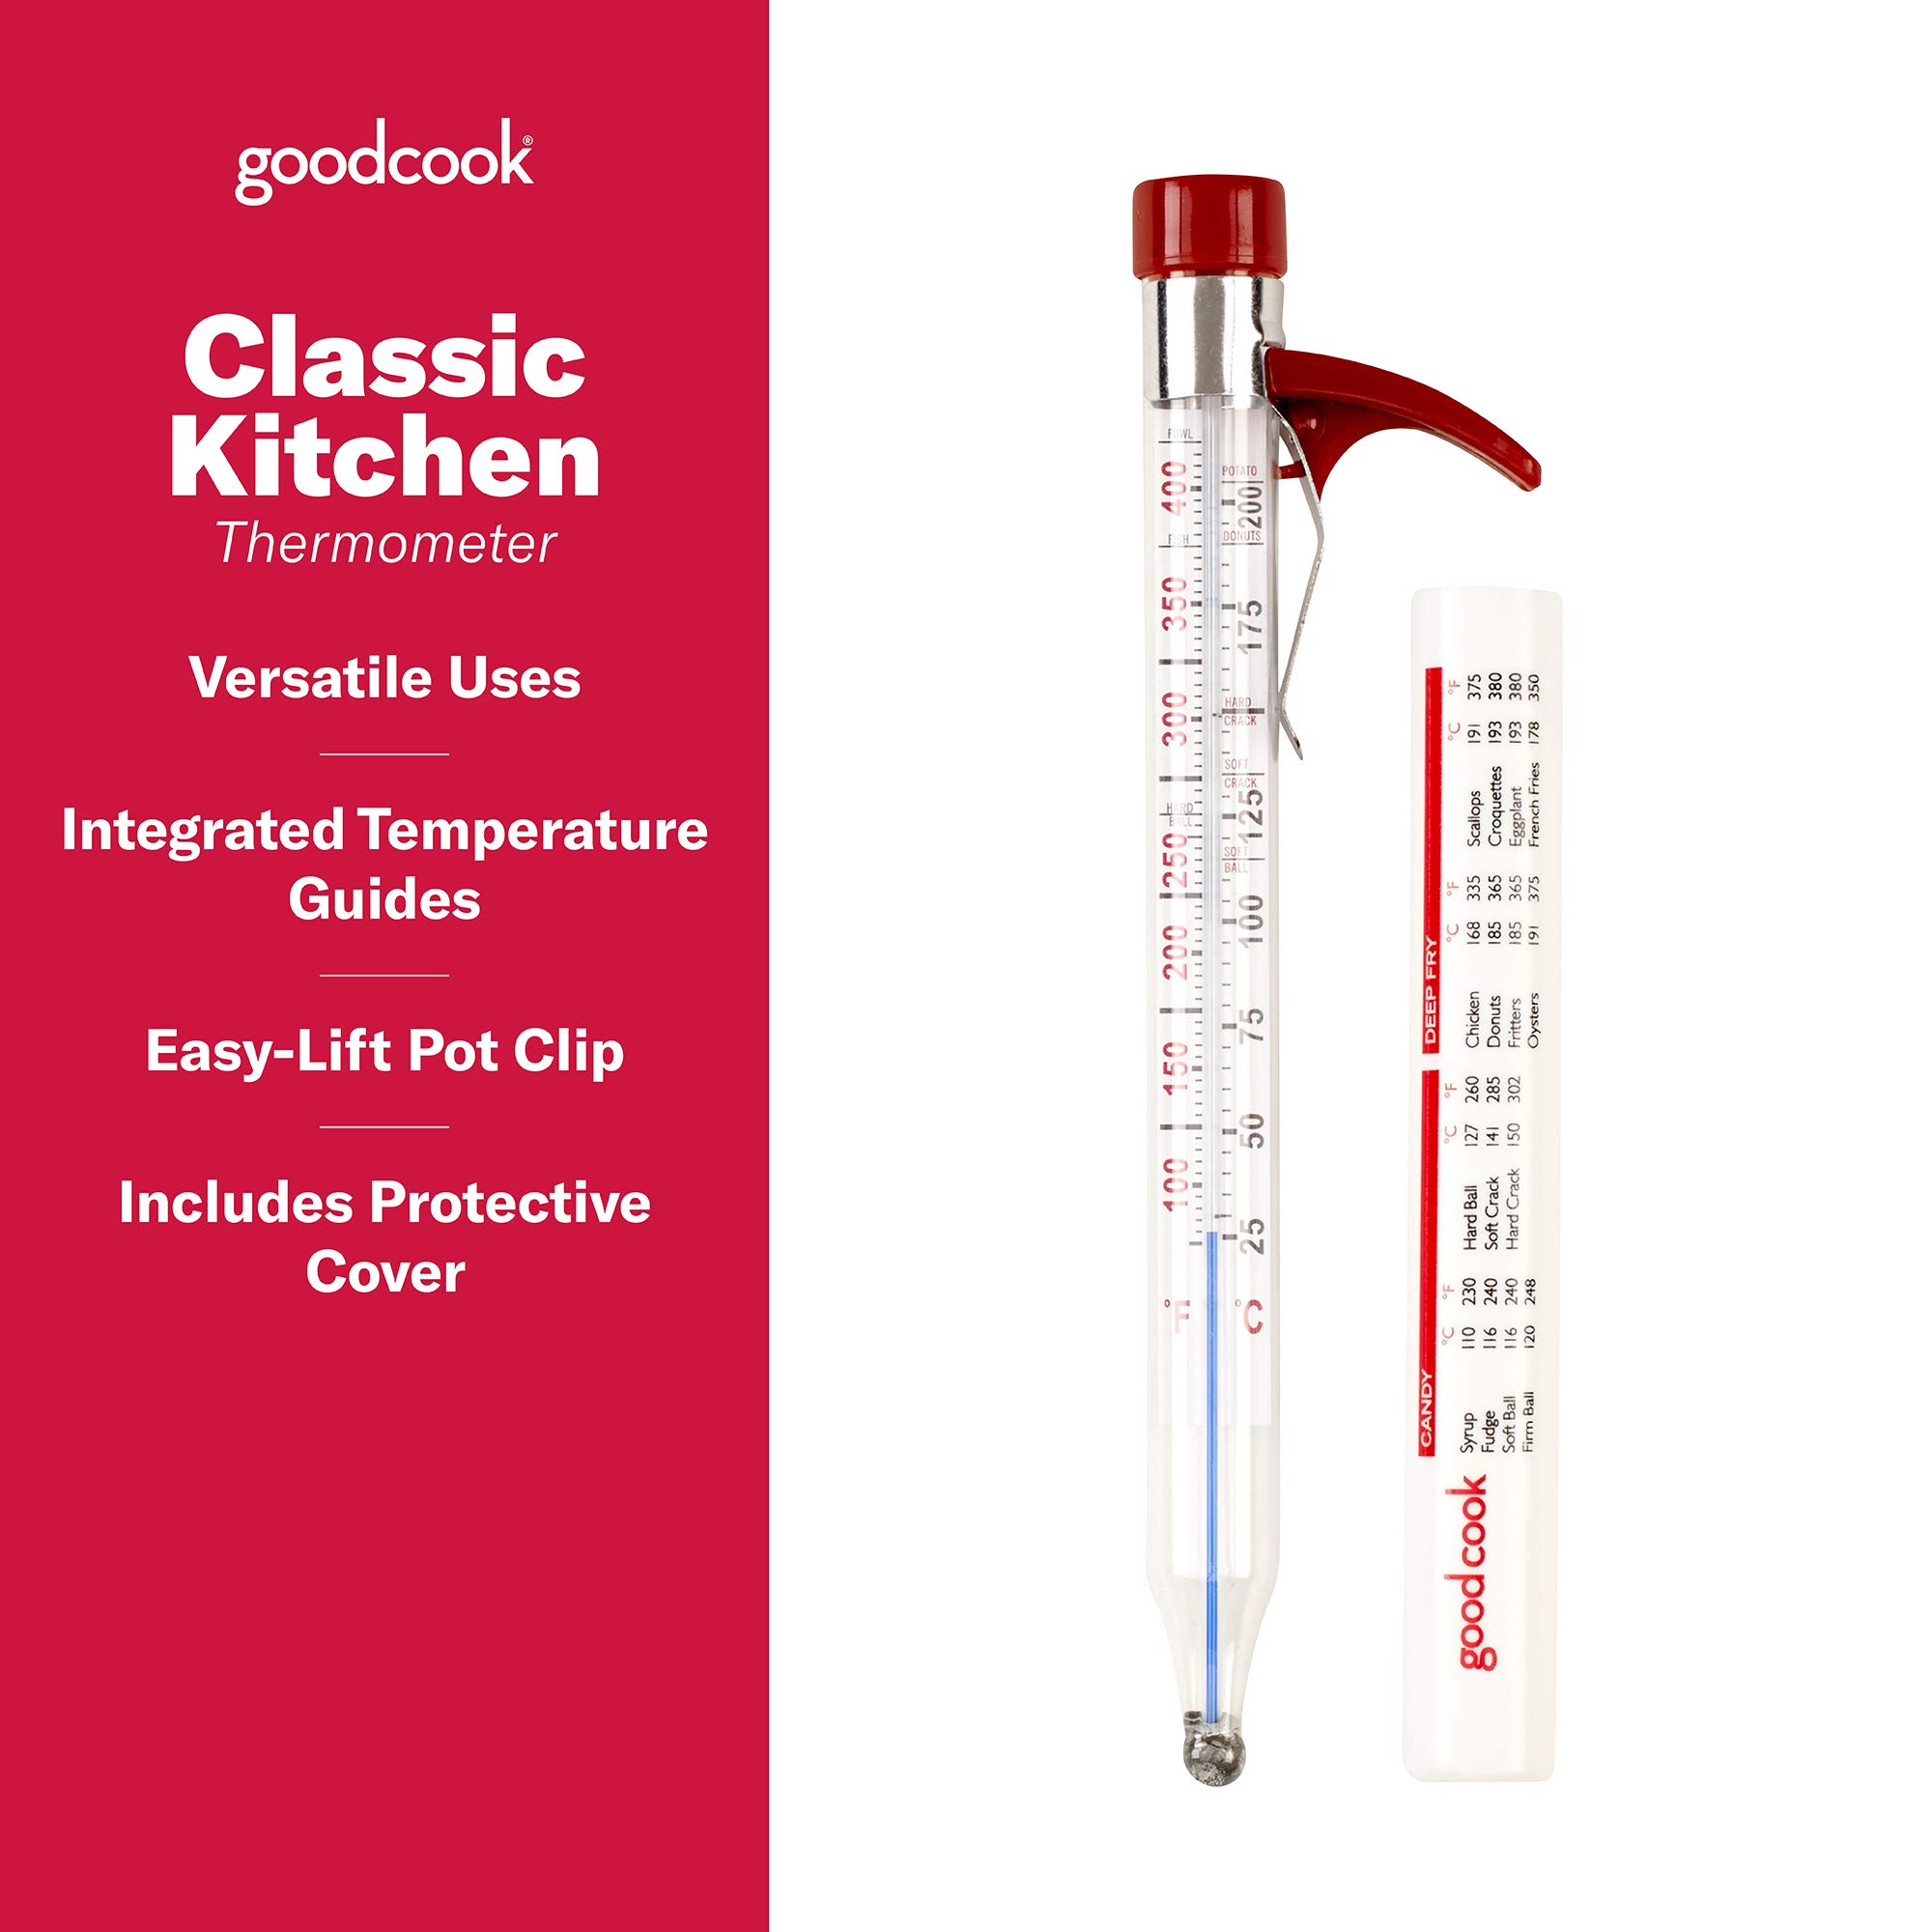 Good Cook Goodcook Classic Candy / Deep Fry Thermometer, Red